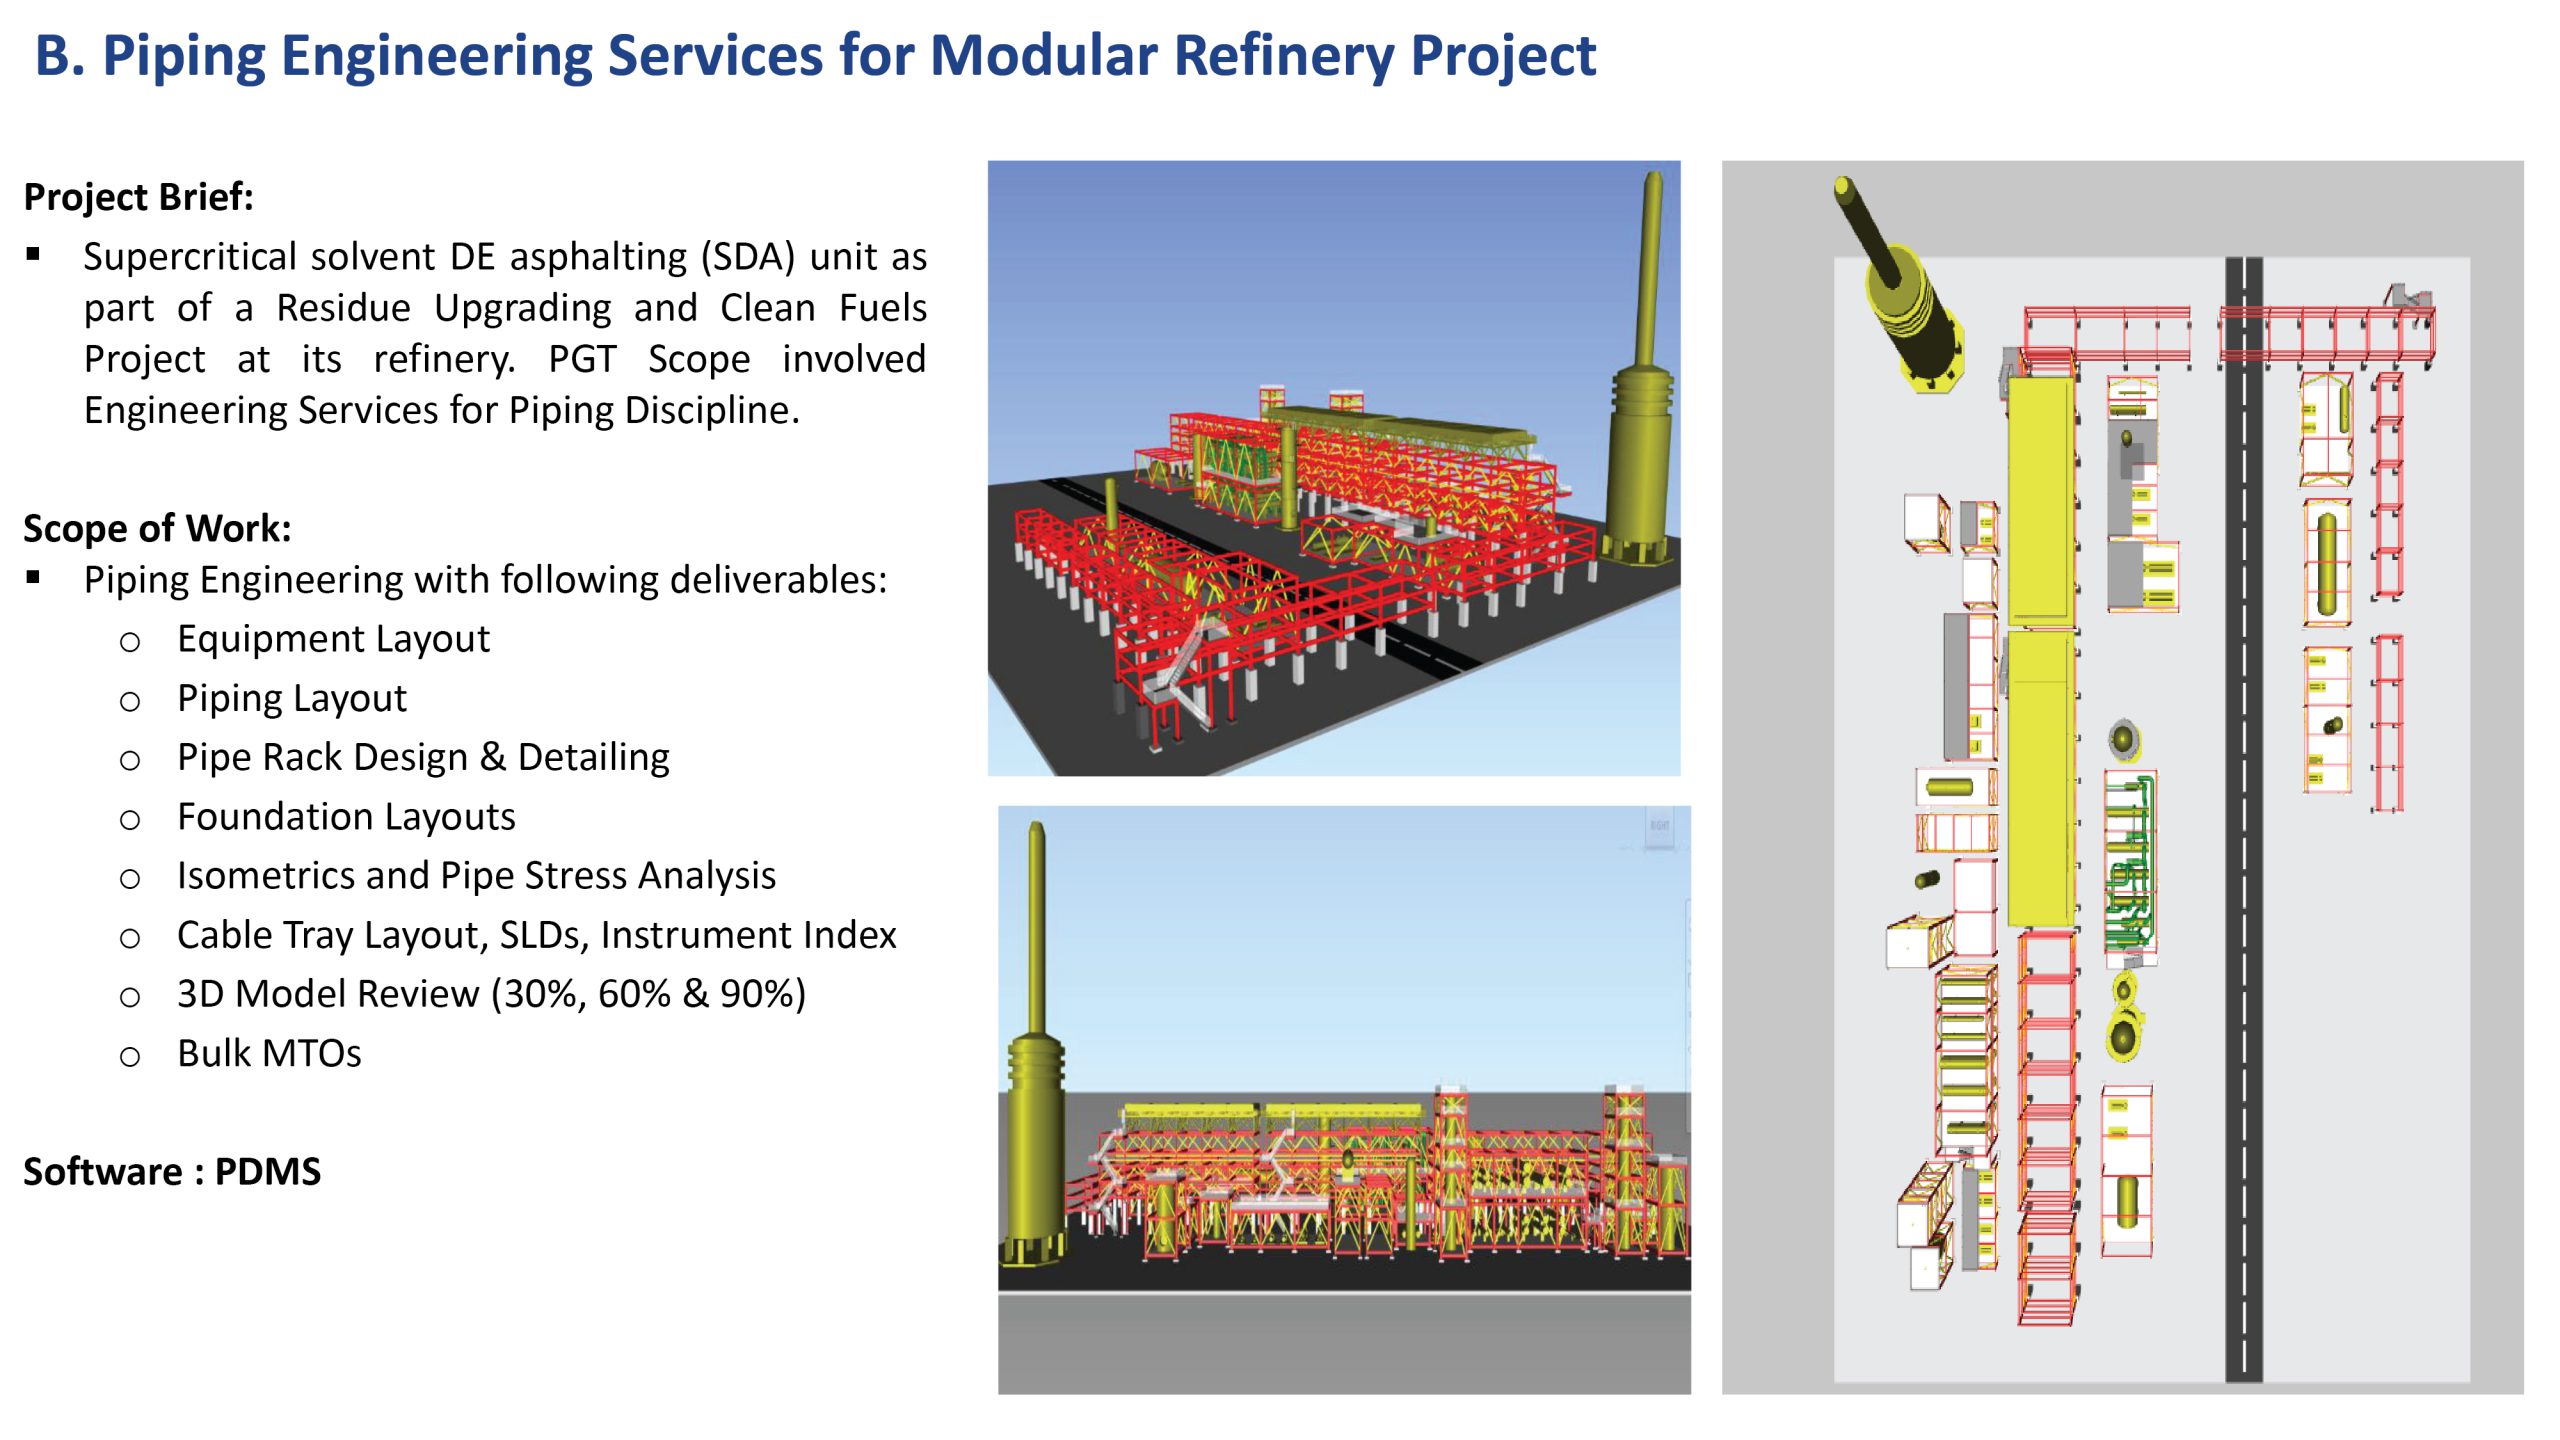 Oil & Gas, Chemical, Waste 2 Energy Projects